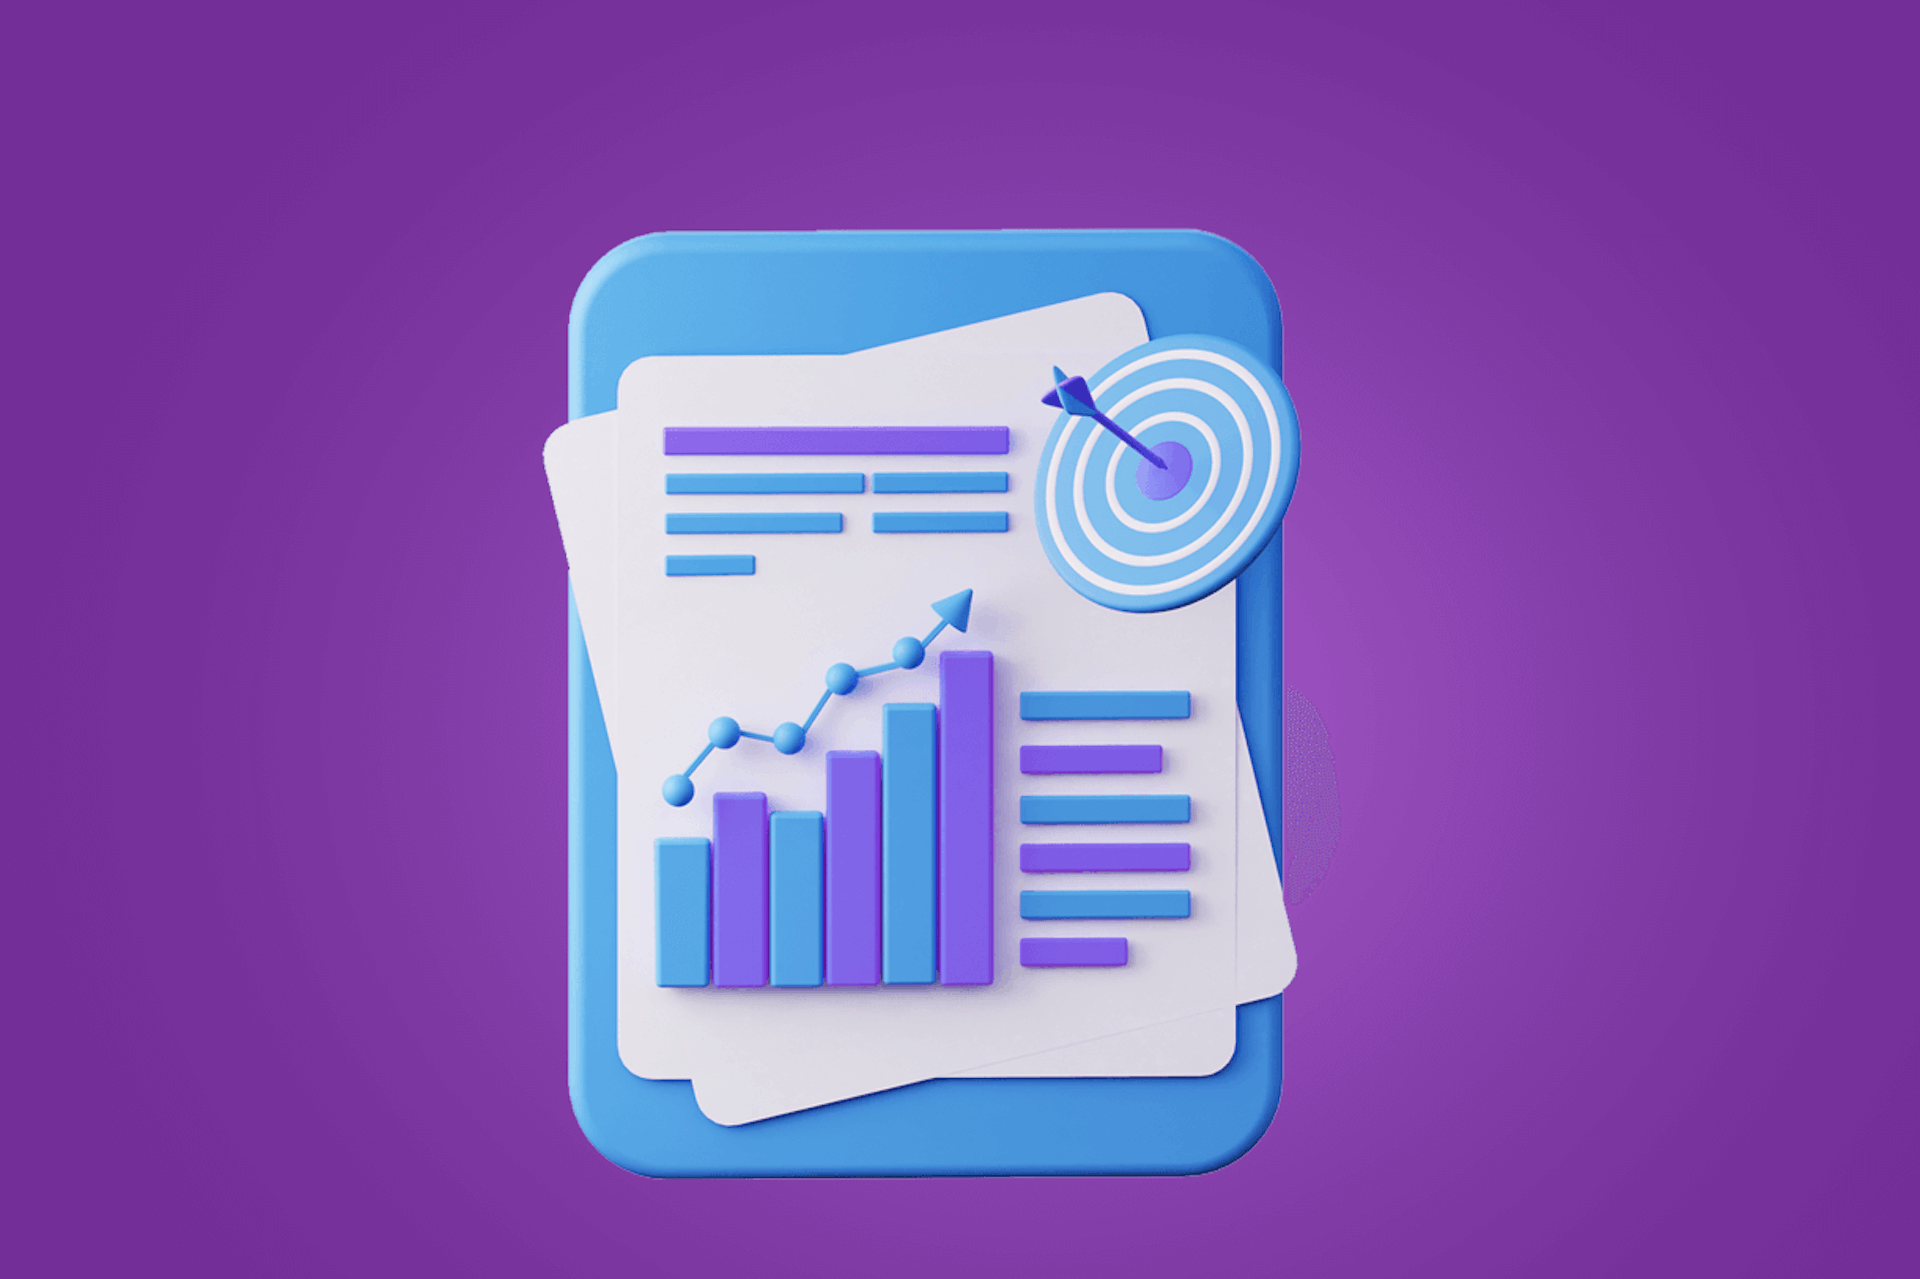 Illustration of a clipboard holding a stack of papers. The top paper has a bar chart in purple and blue with an arrow leading up and to the right, surrounded by notes. There is a target with an arrow in the bullseye in the top right. Blog post for important marketing metrics and KPIs you should be tracking. 